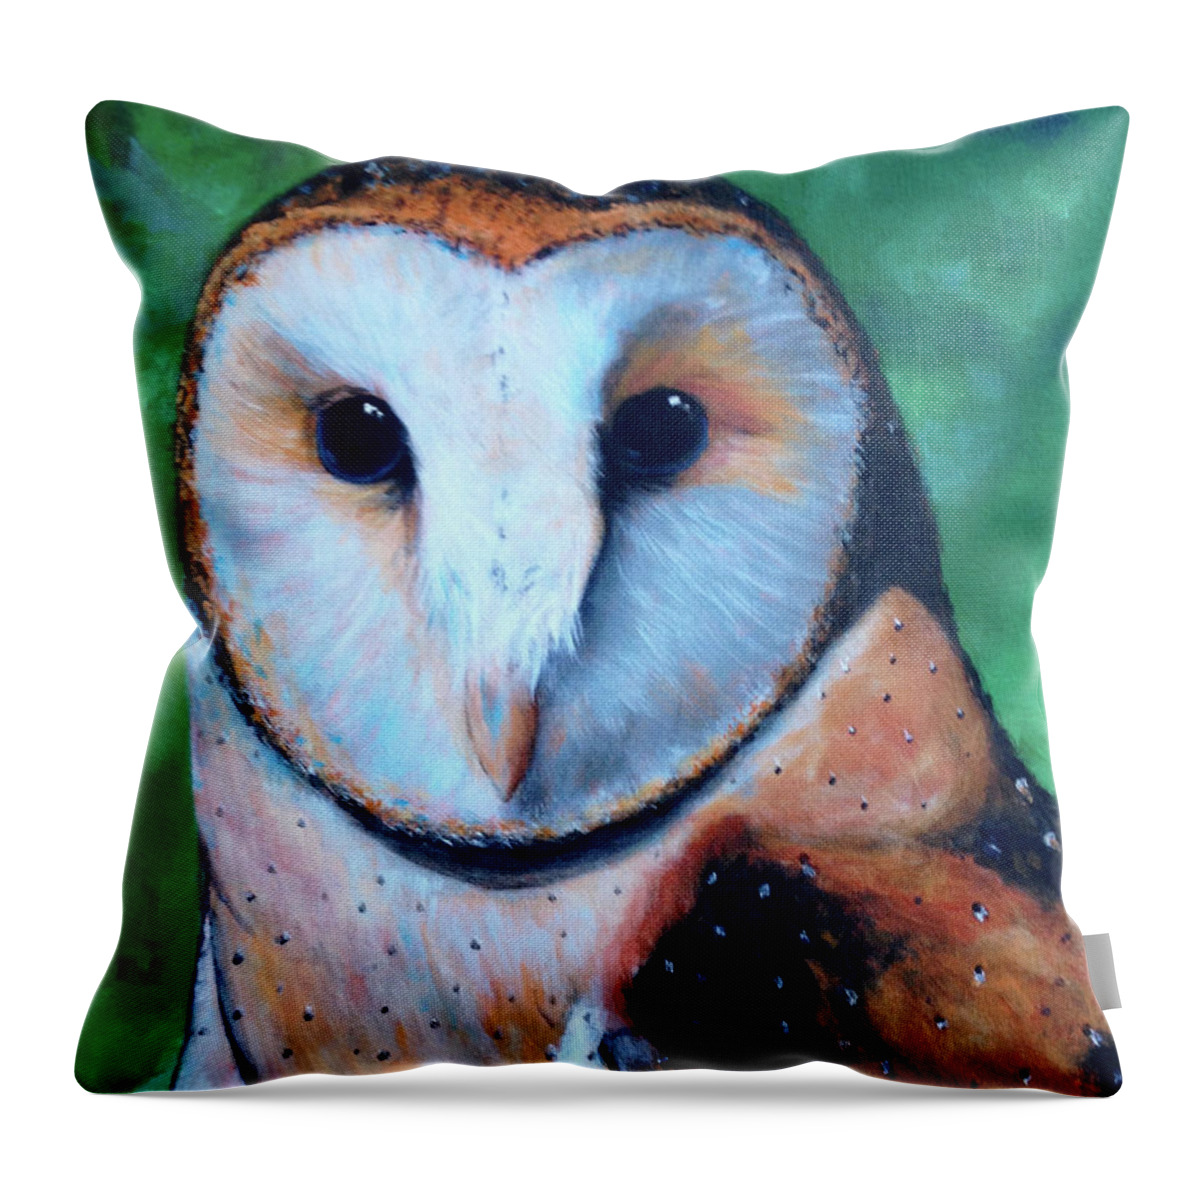 Owl Throw Pillow featuring the painting Barn Owl by Donna Tucker